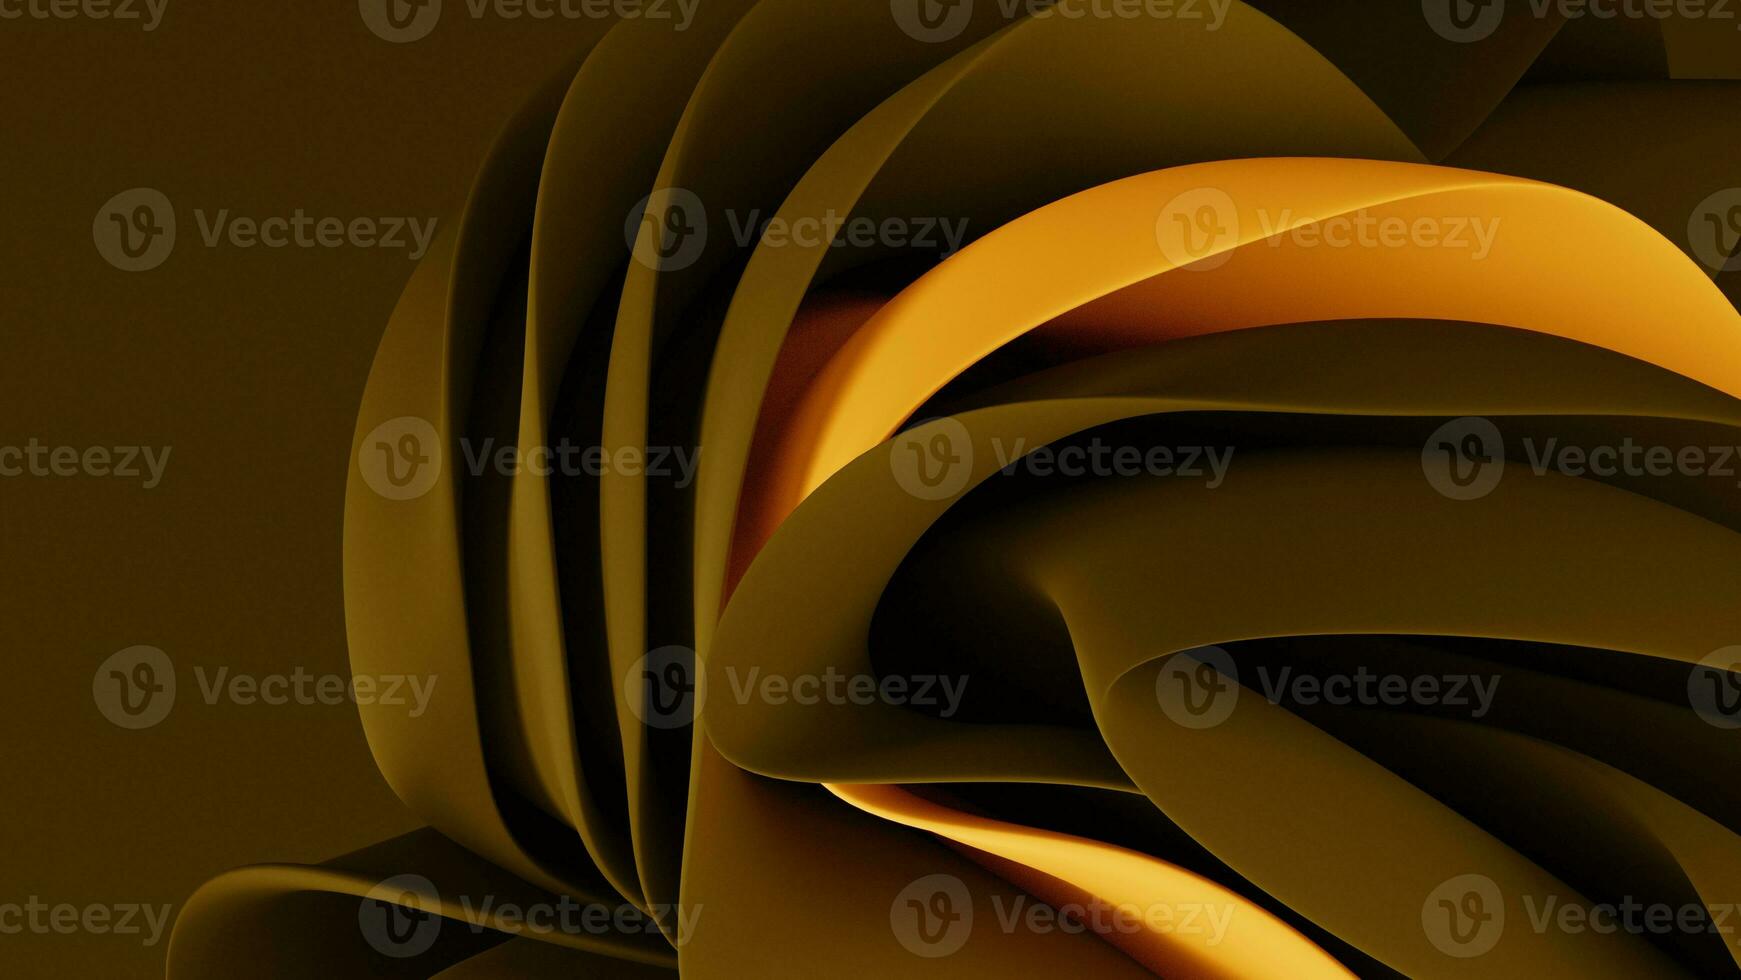 Gold Color Abstract Shiny Background photo